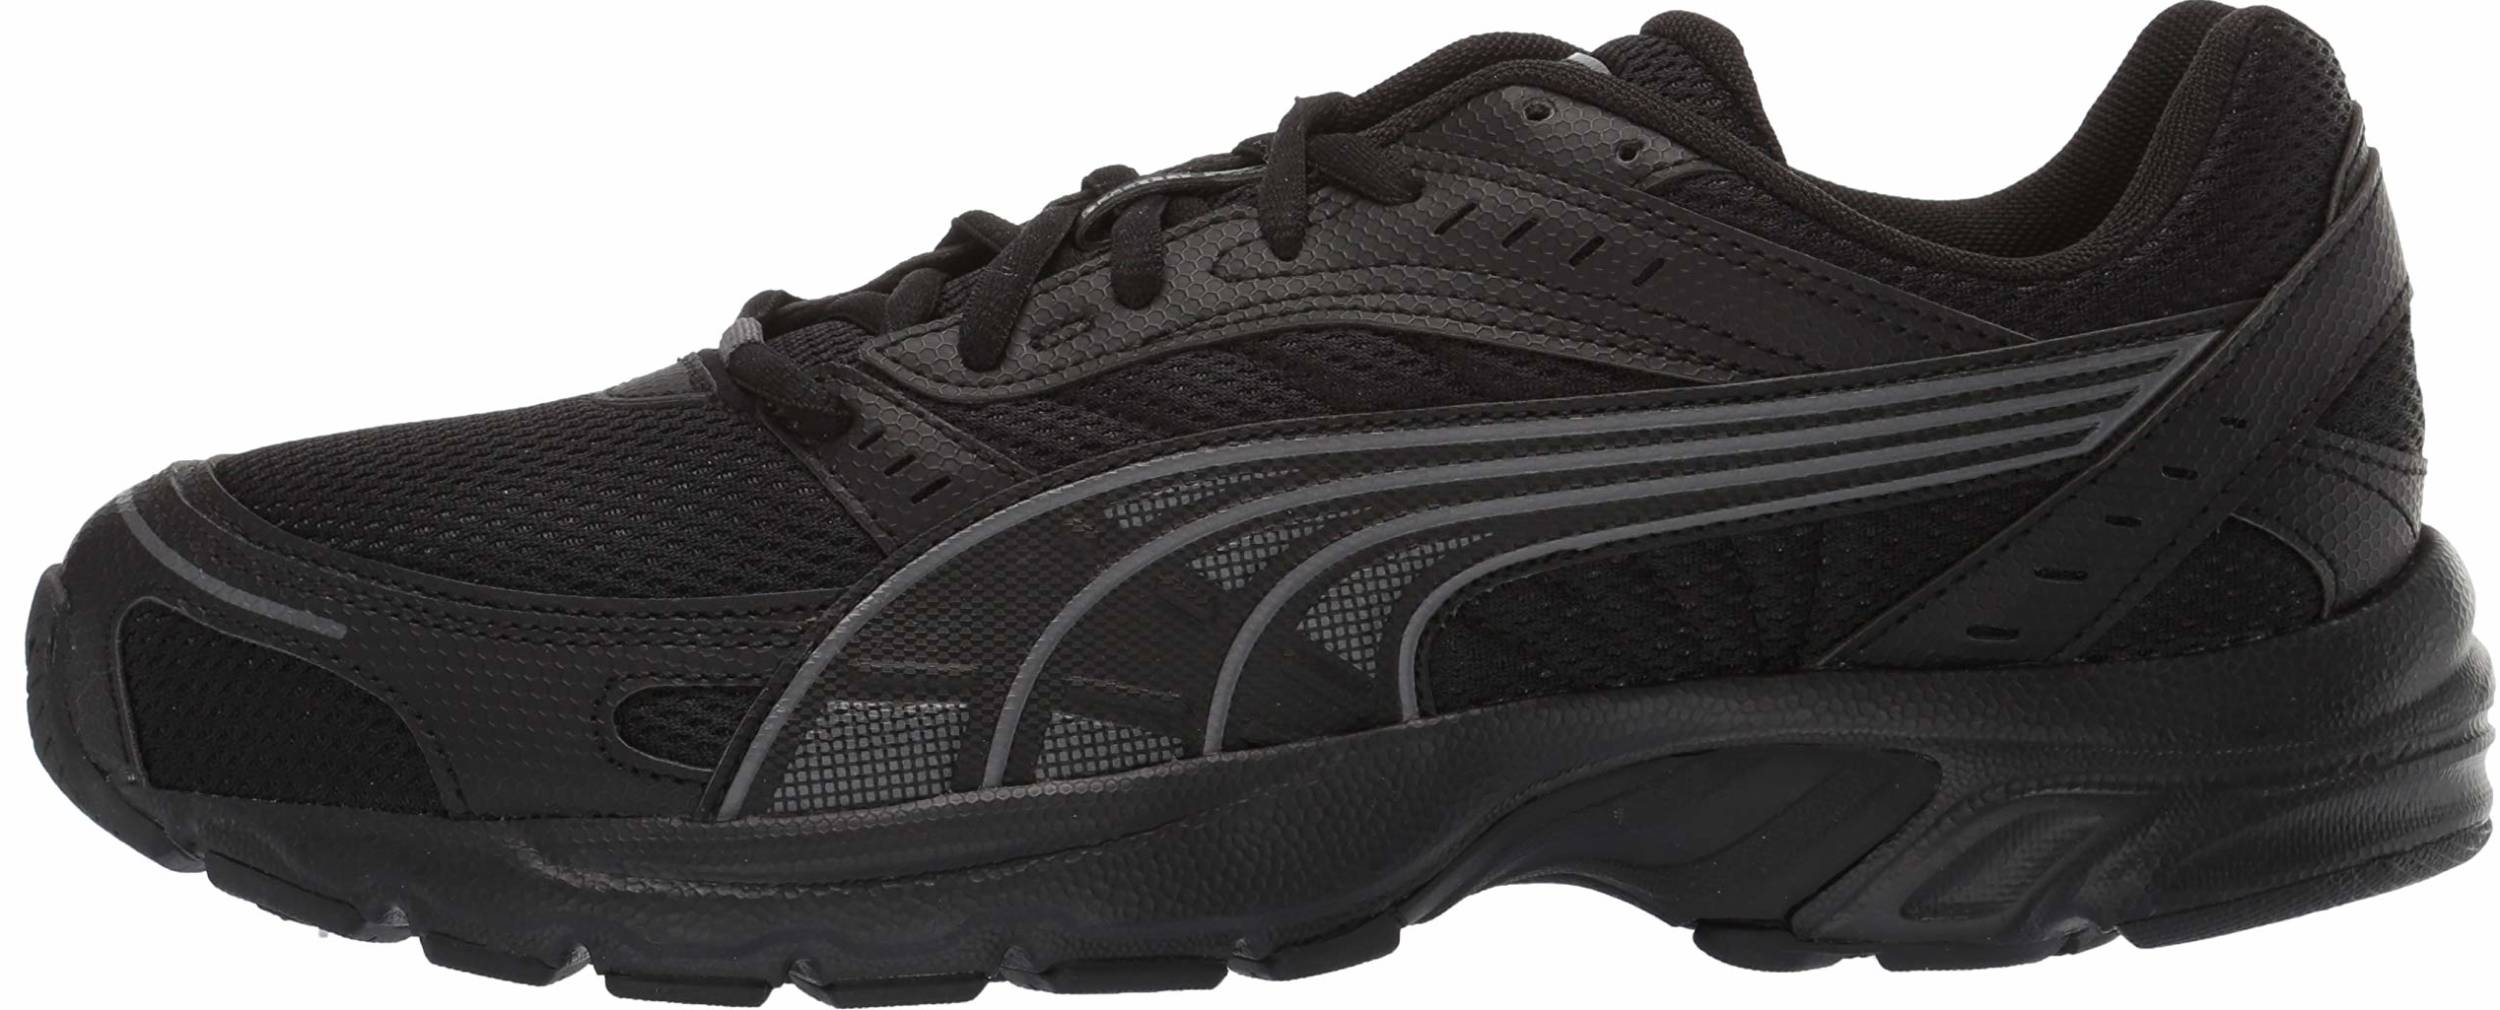 puma men's storm ind running shoes price